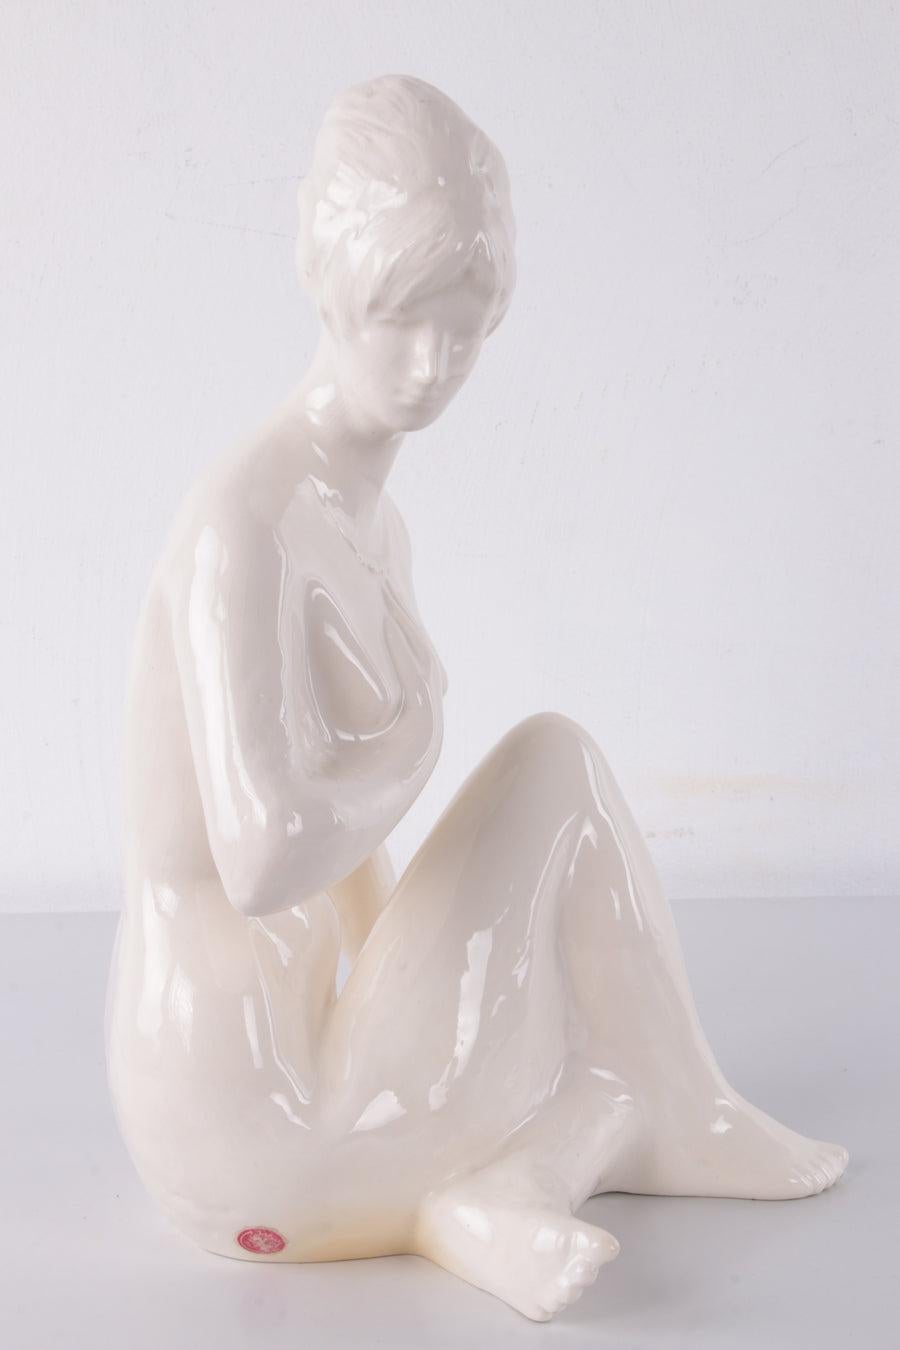 White Female statue made of ceramic around 1960

This is a beautiful white ceramic female figure sitting charmingly with her legs crossed.

Presumably made in Germany in the 1960s.

No chips or damage, so in nice condition.

Additional information: